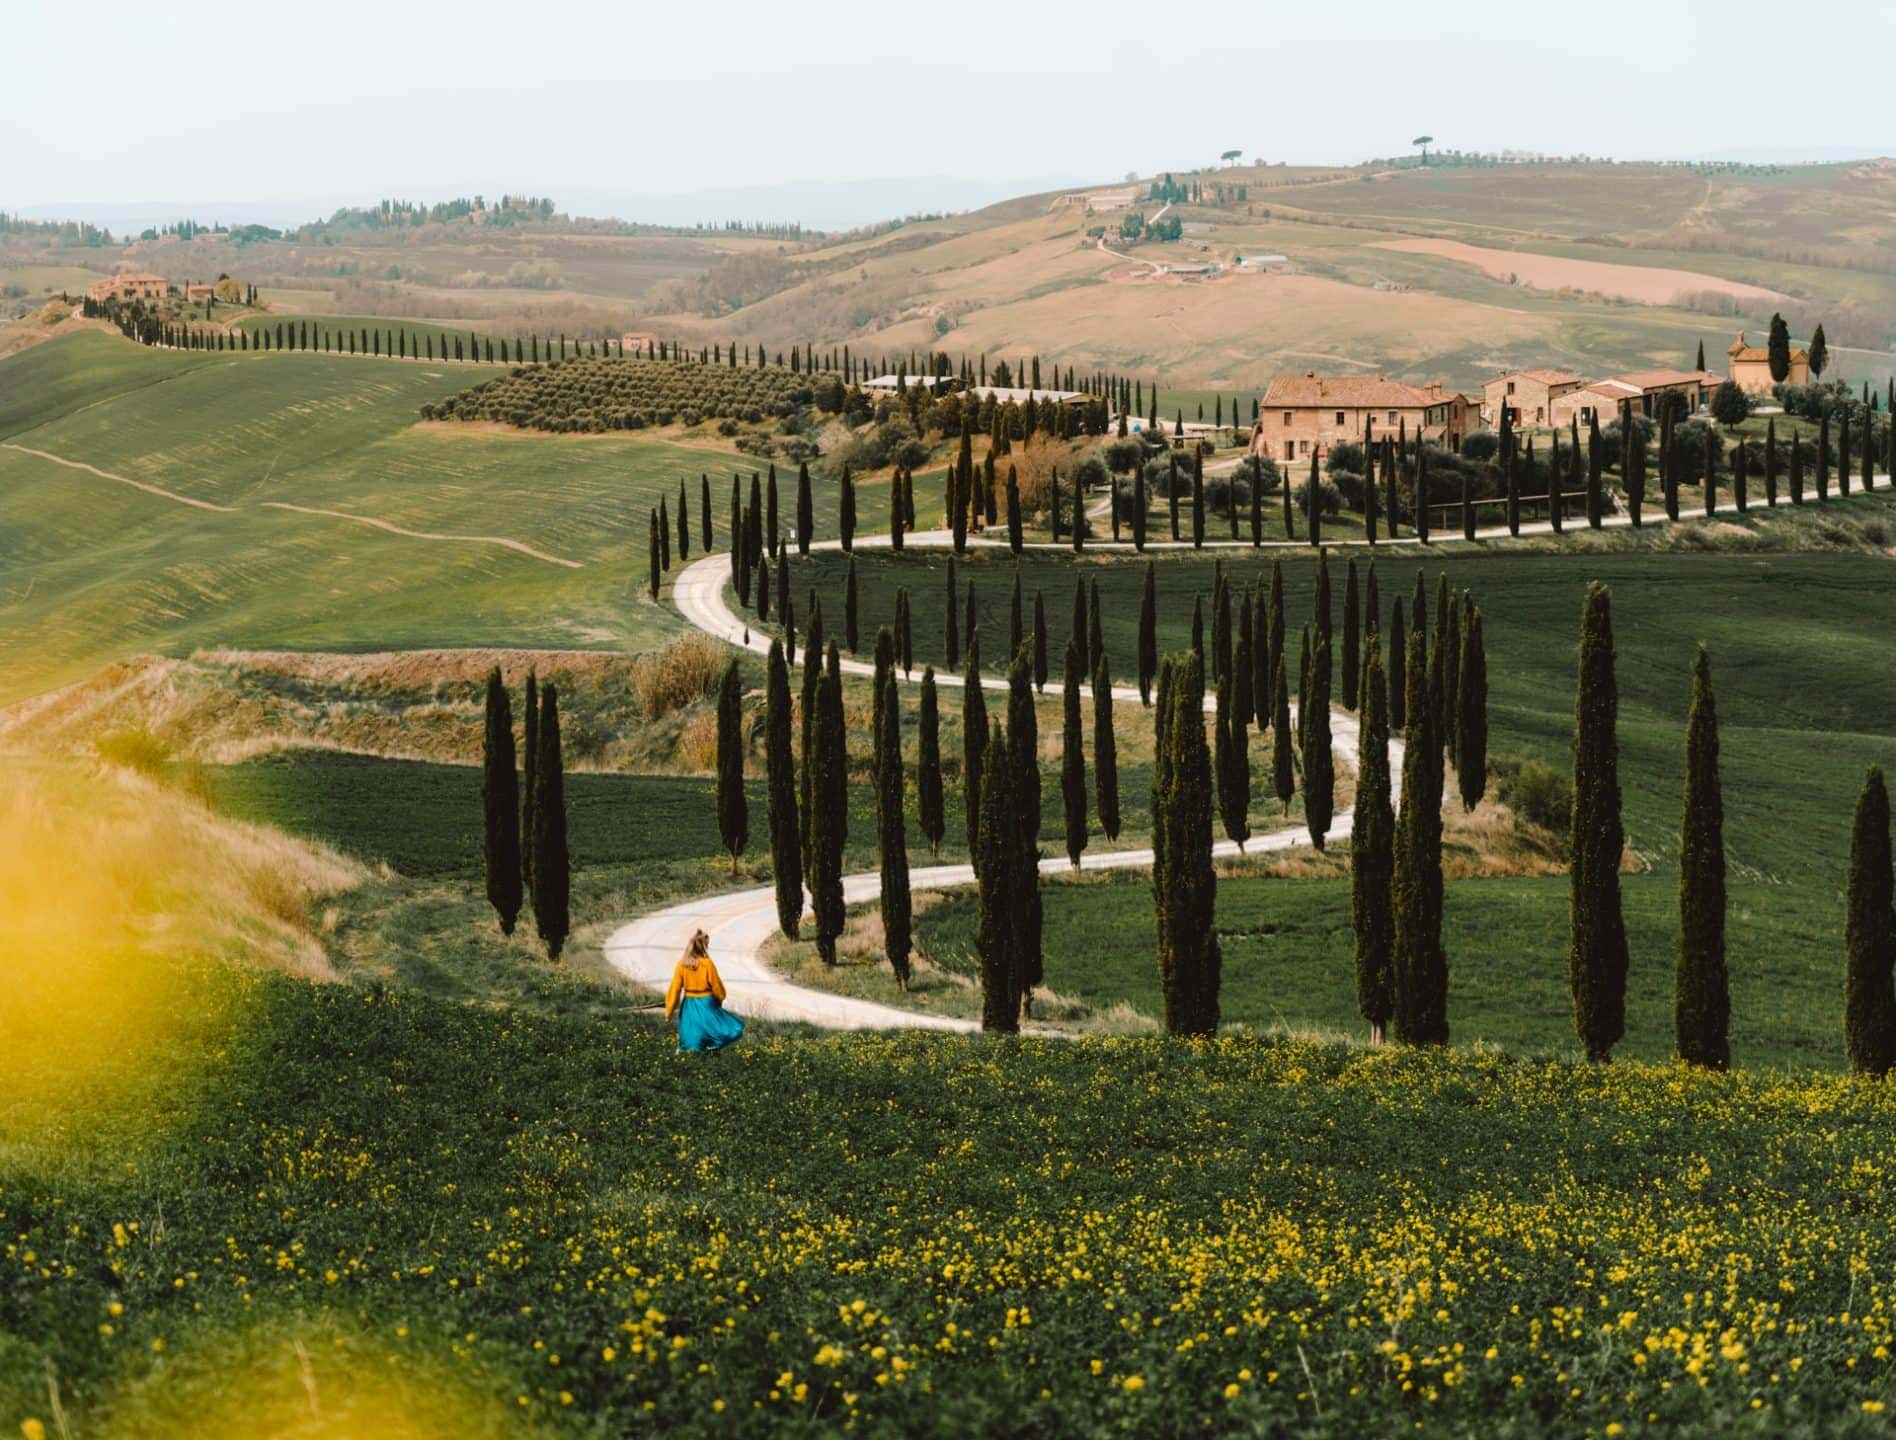 Tuscany Road Trip Best Things To Do In Tuscany In 3 Days